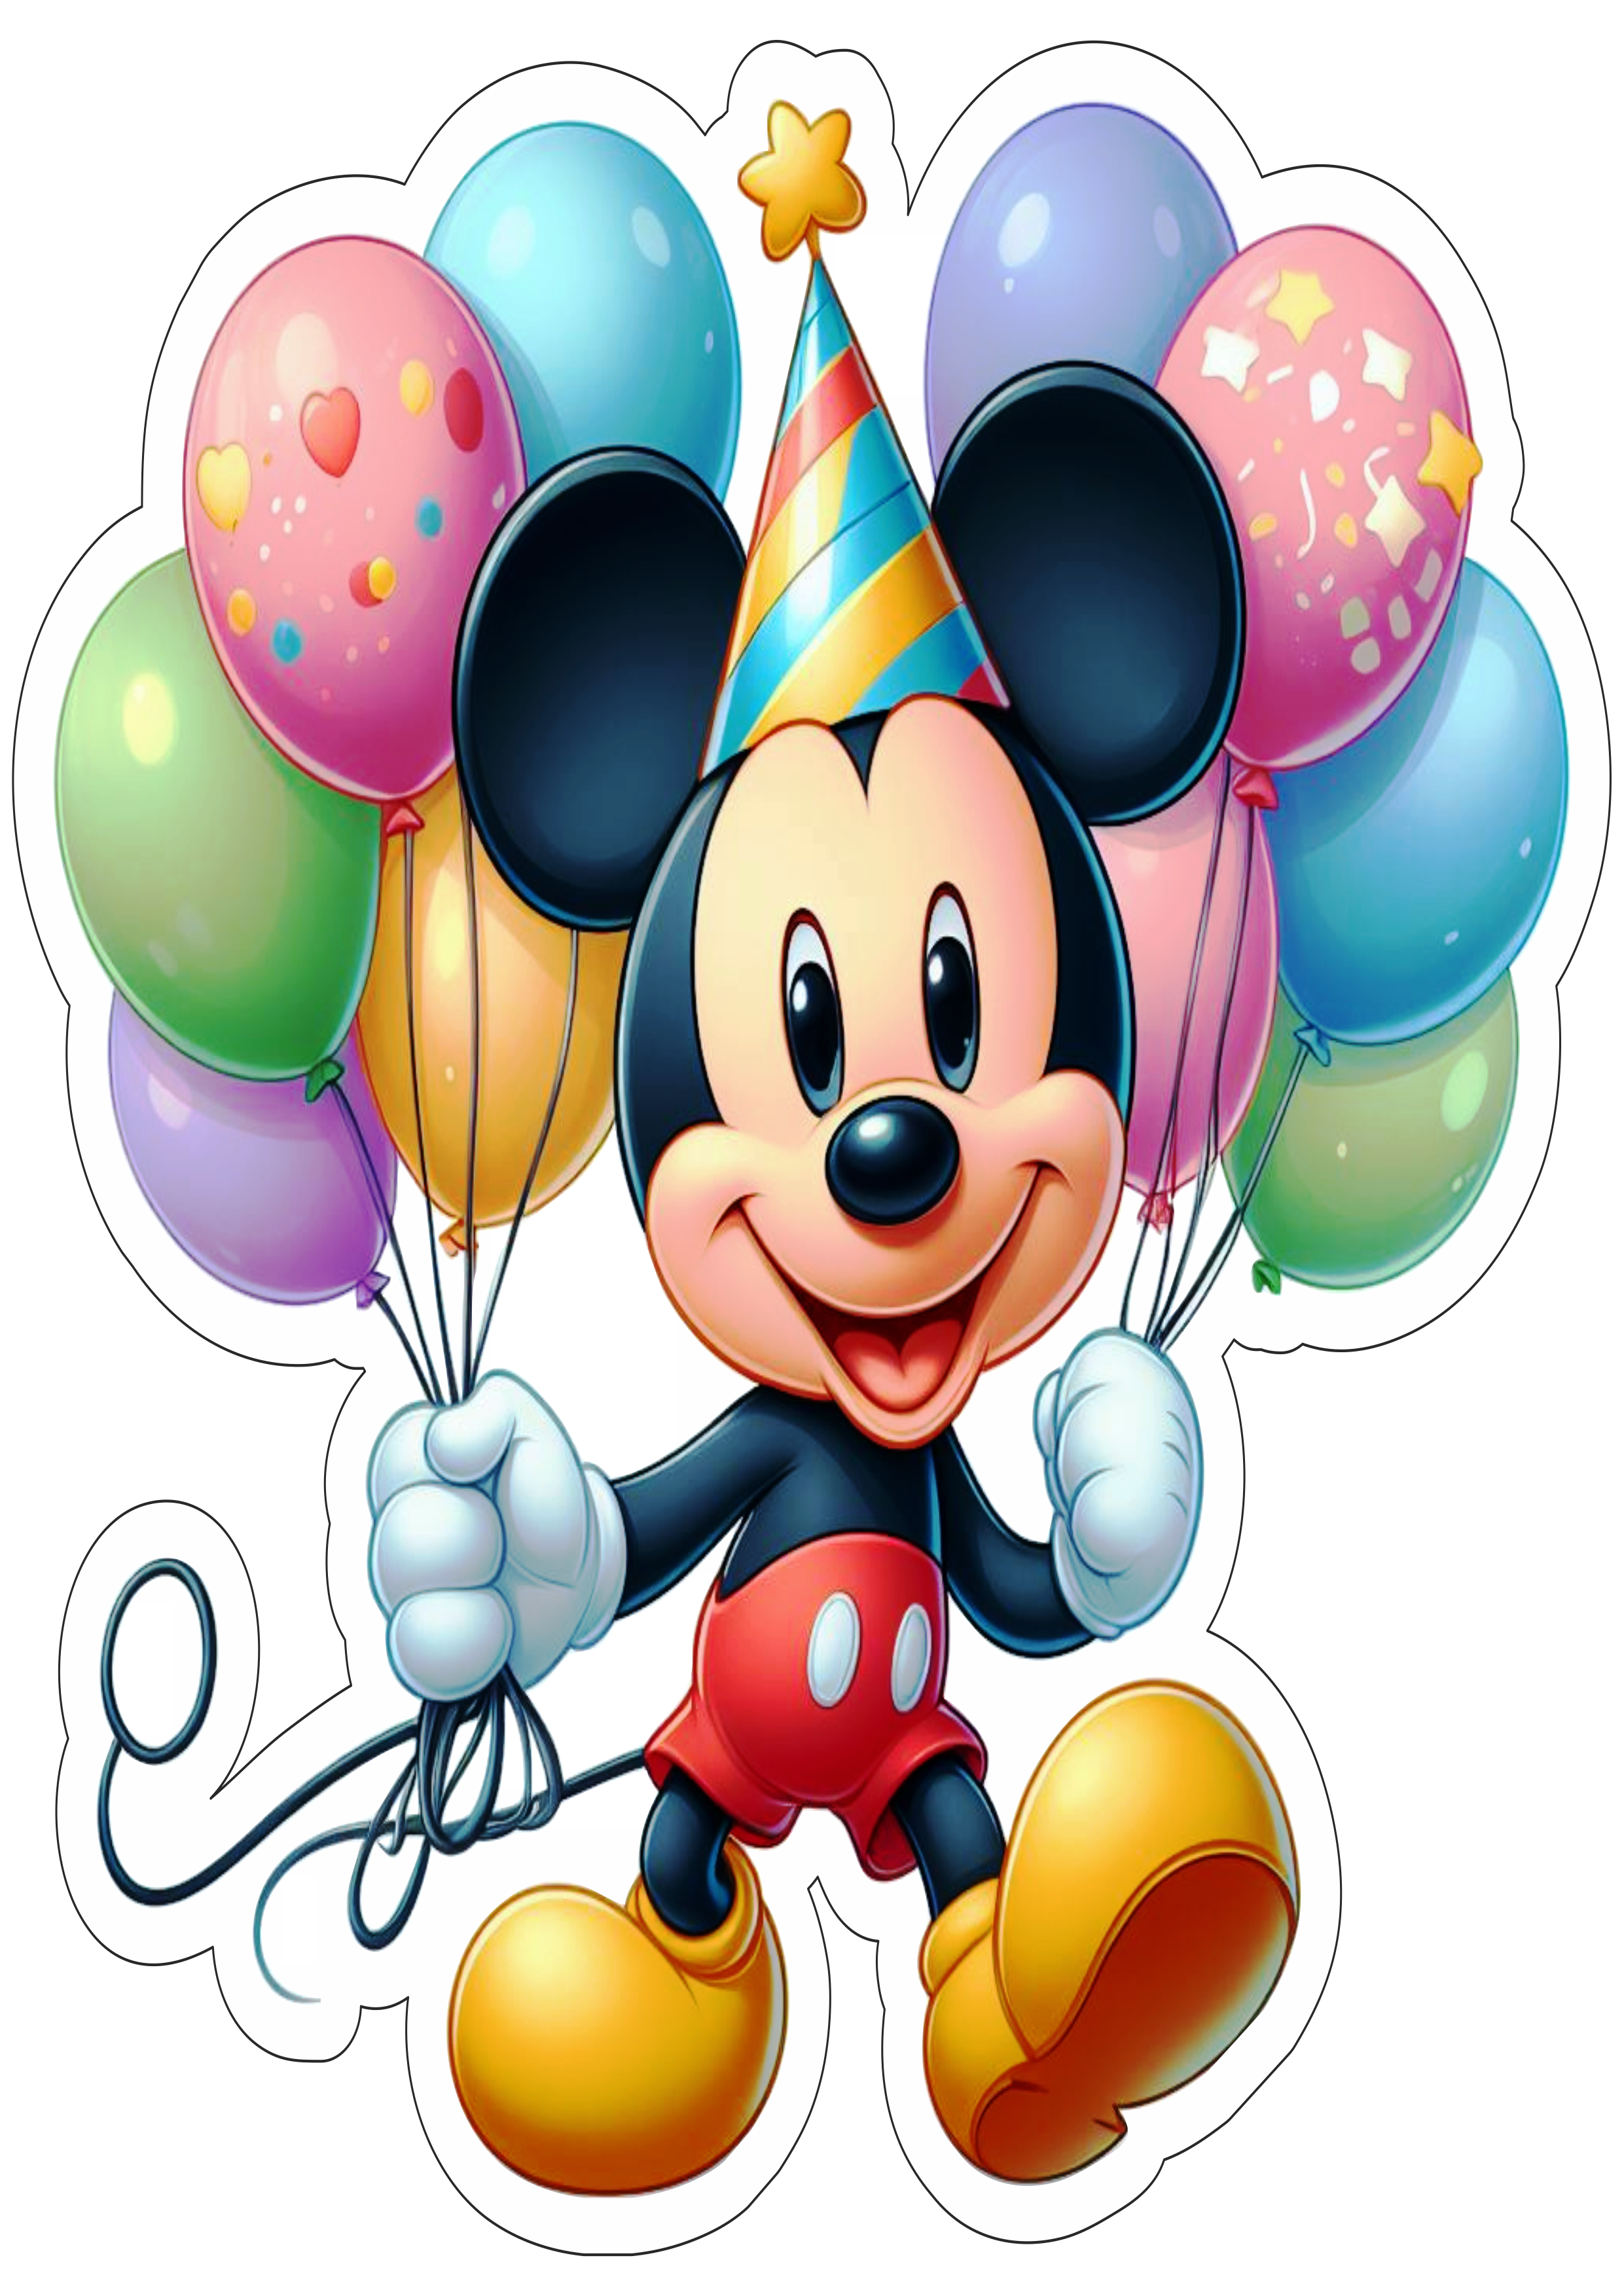 Mickey Mouse aniversário png